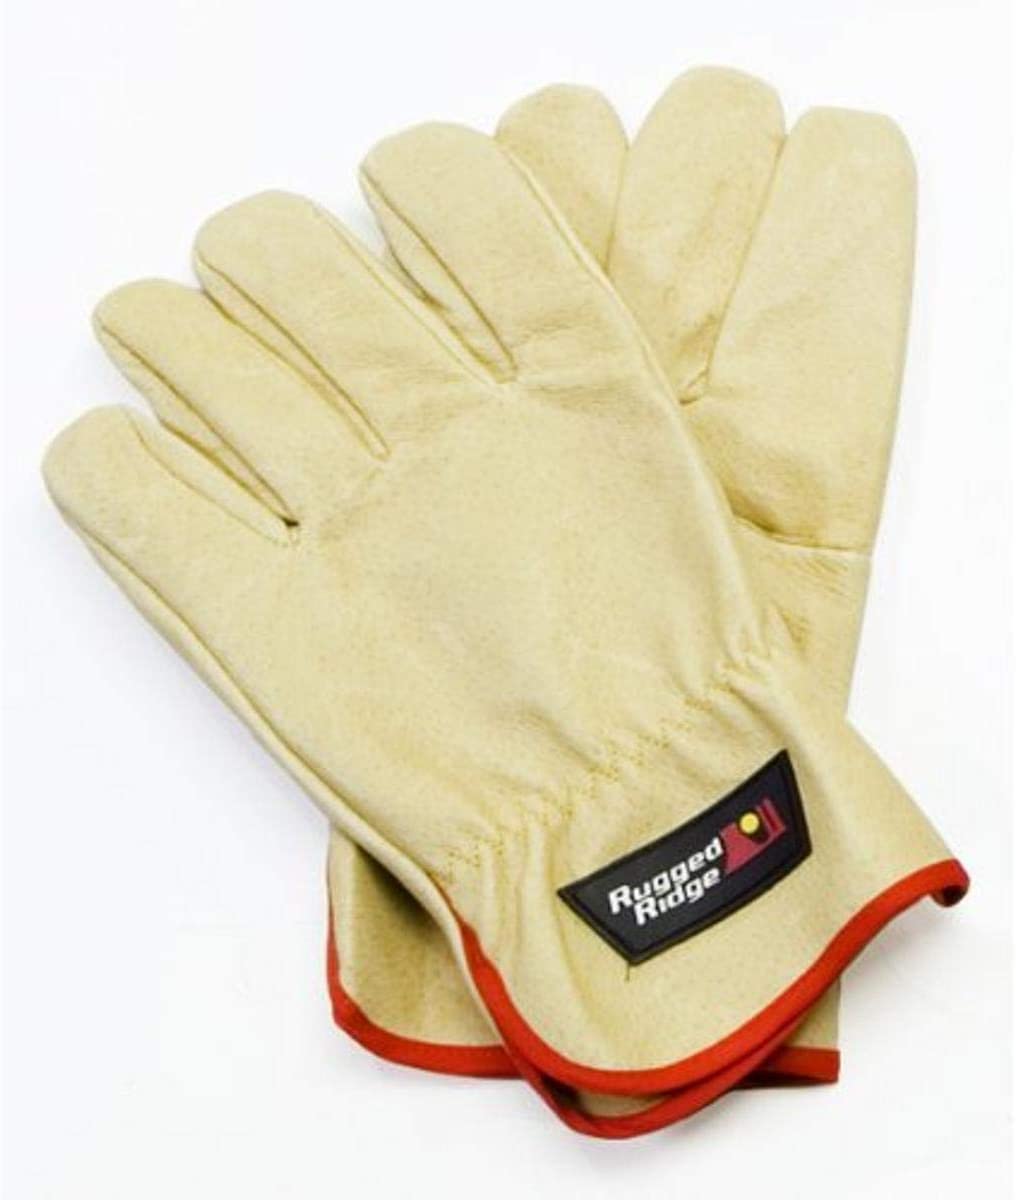 Rugged Ridge Recovery Gloves, Leather